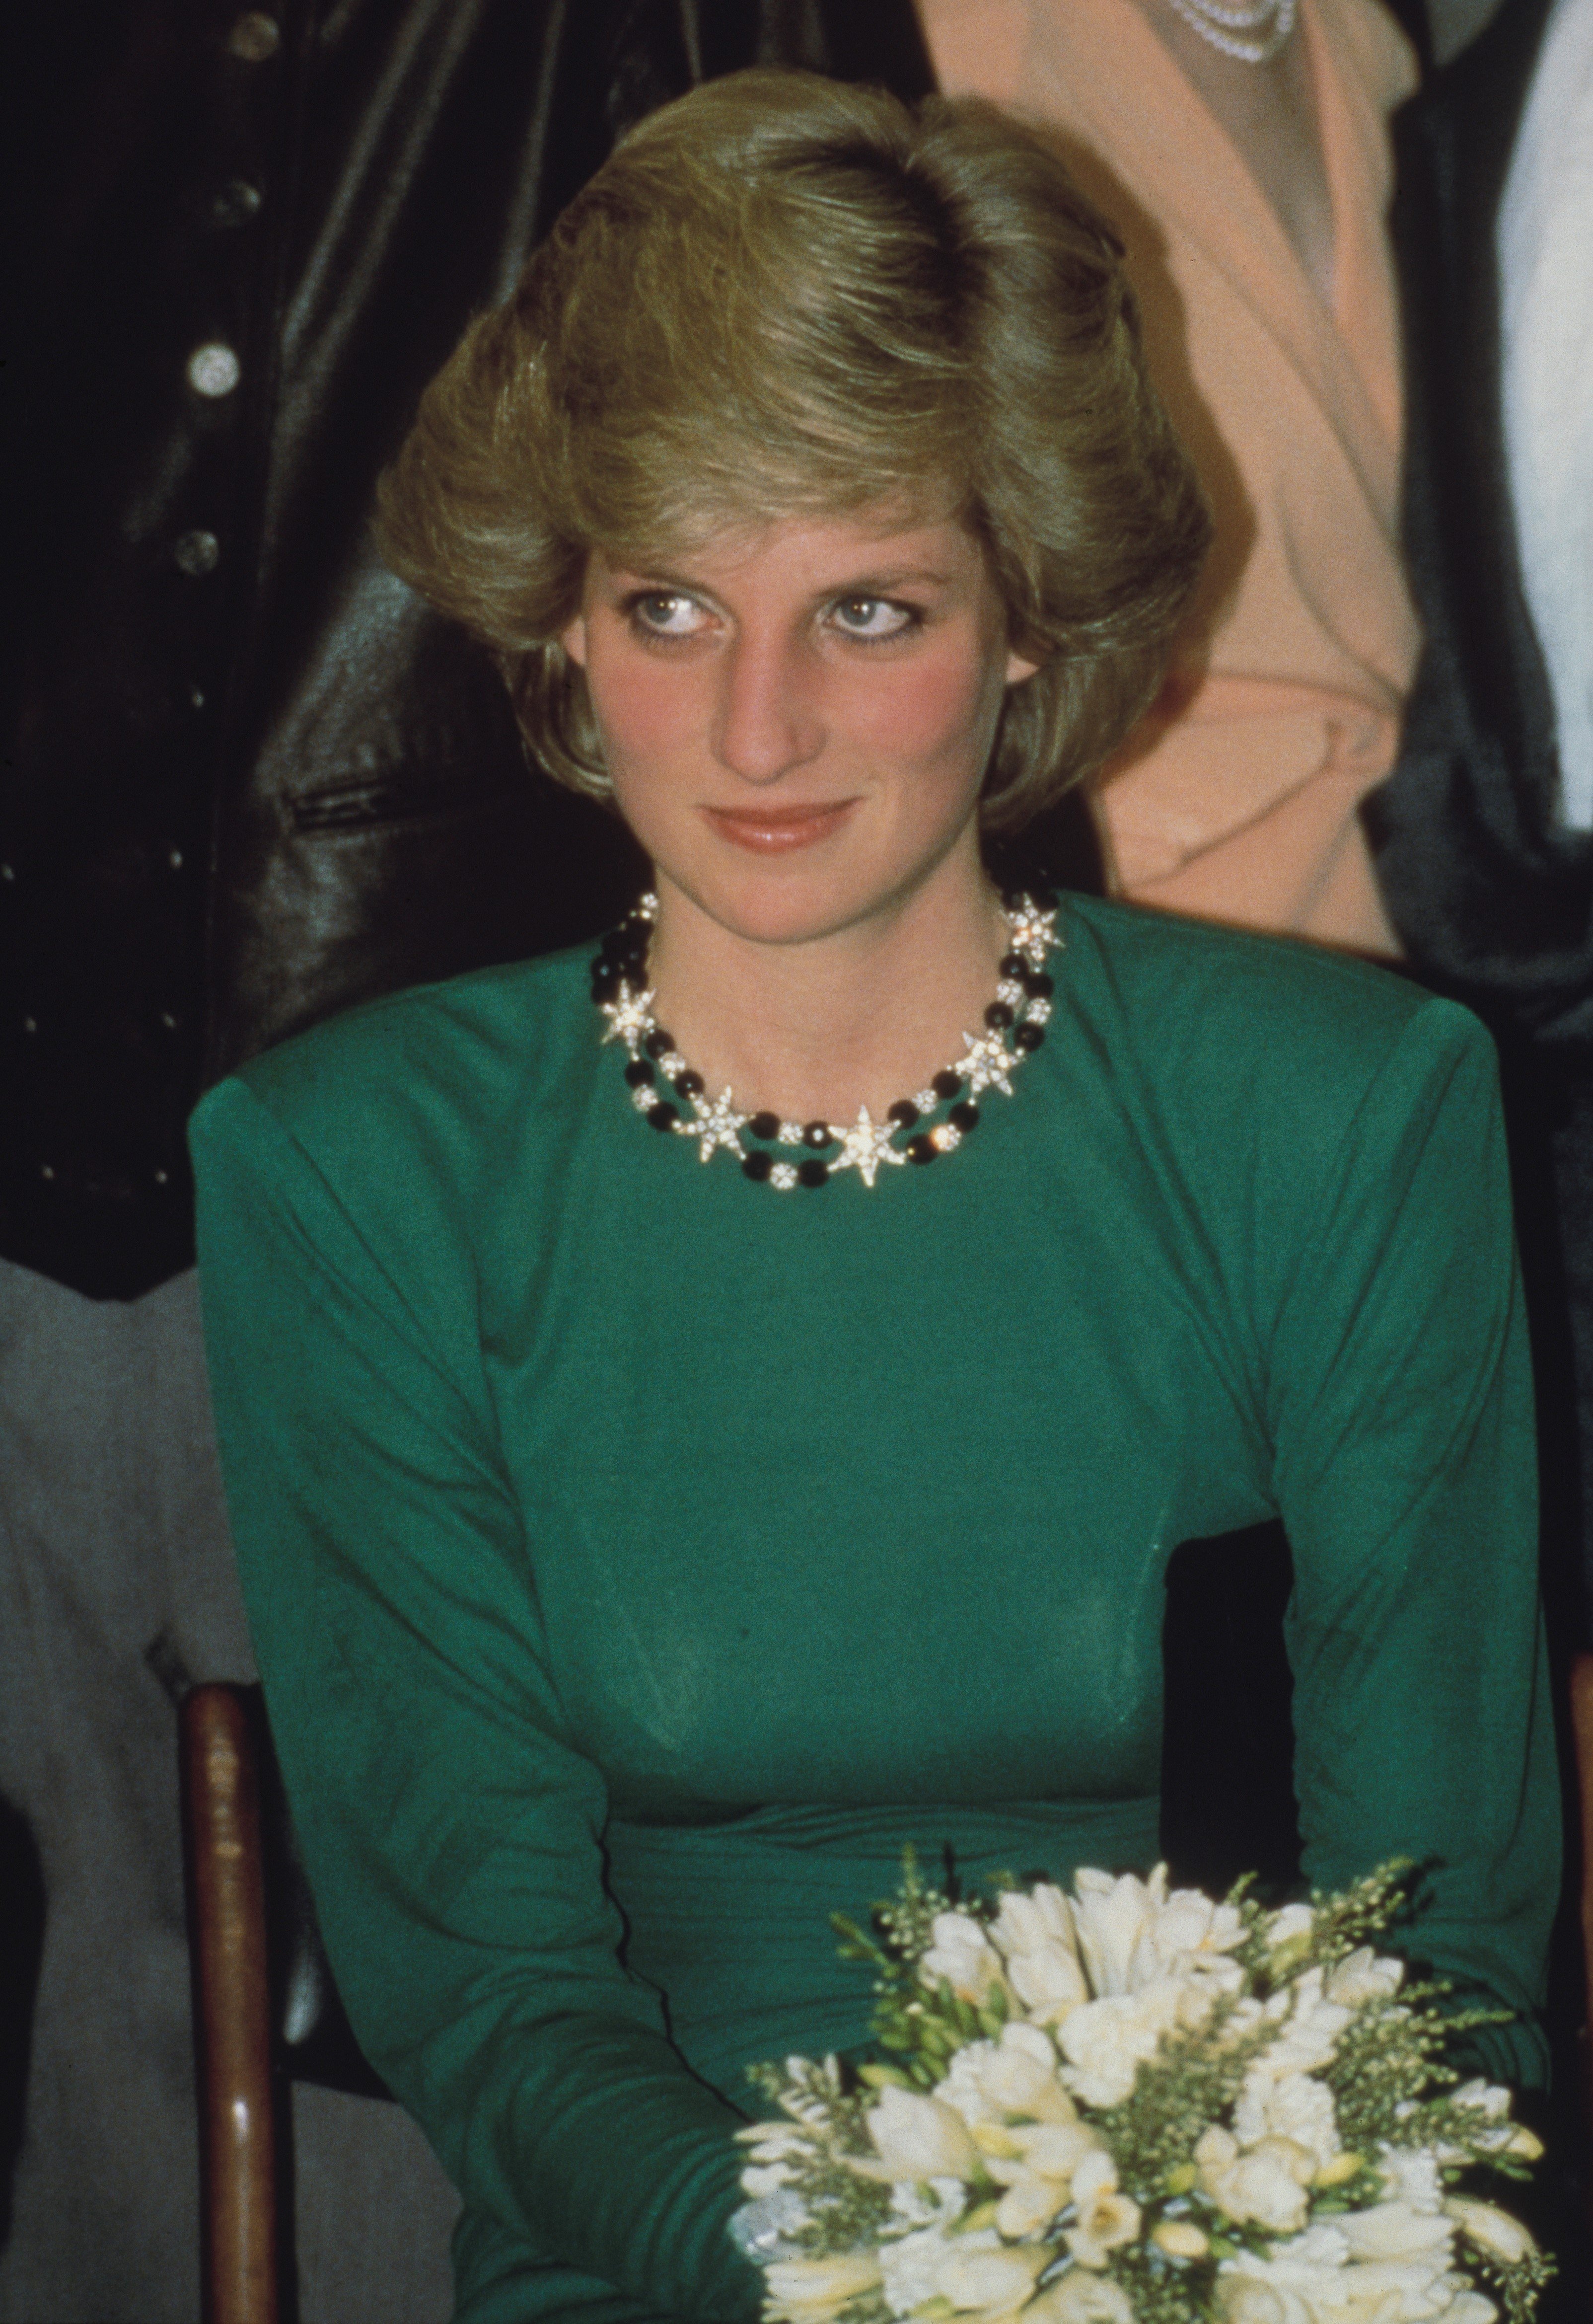 Princess Diana seated in a dark green dress and holding a bouquet of flowers at the headquarters of the London City Ballet